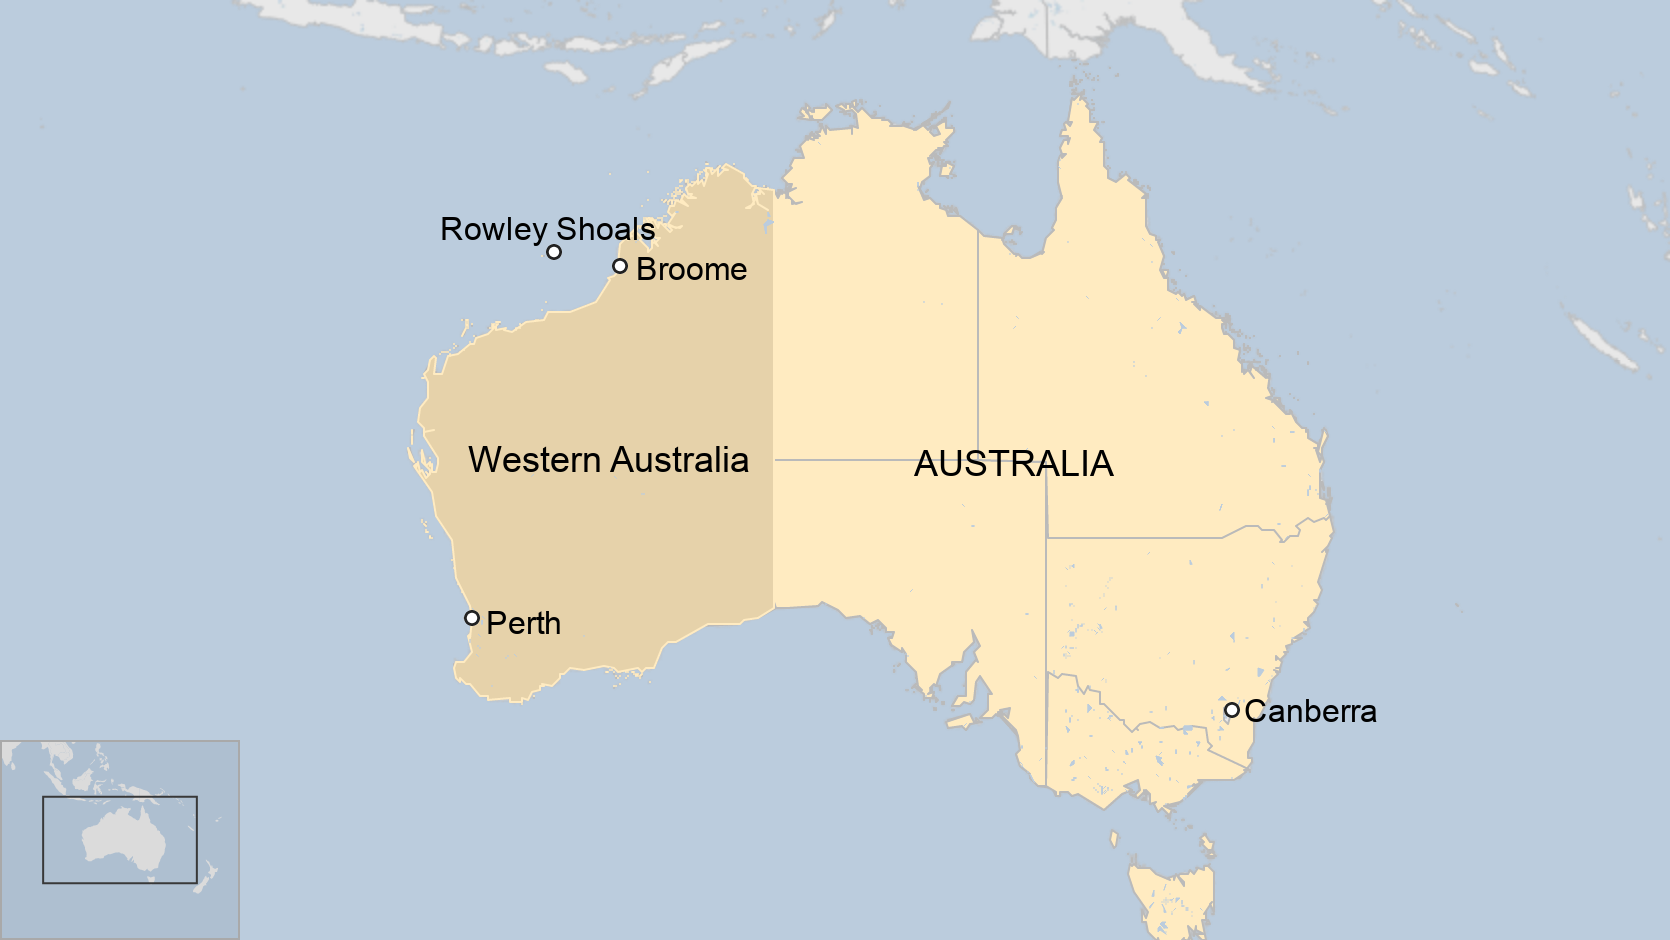 Map of Australia showing Rowley Shoals